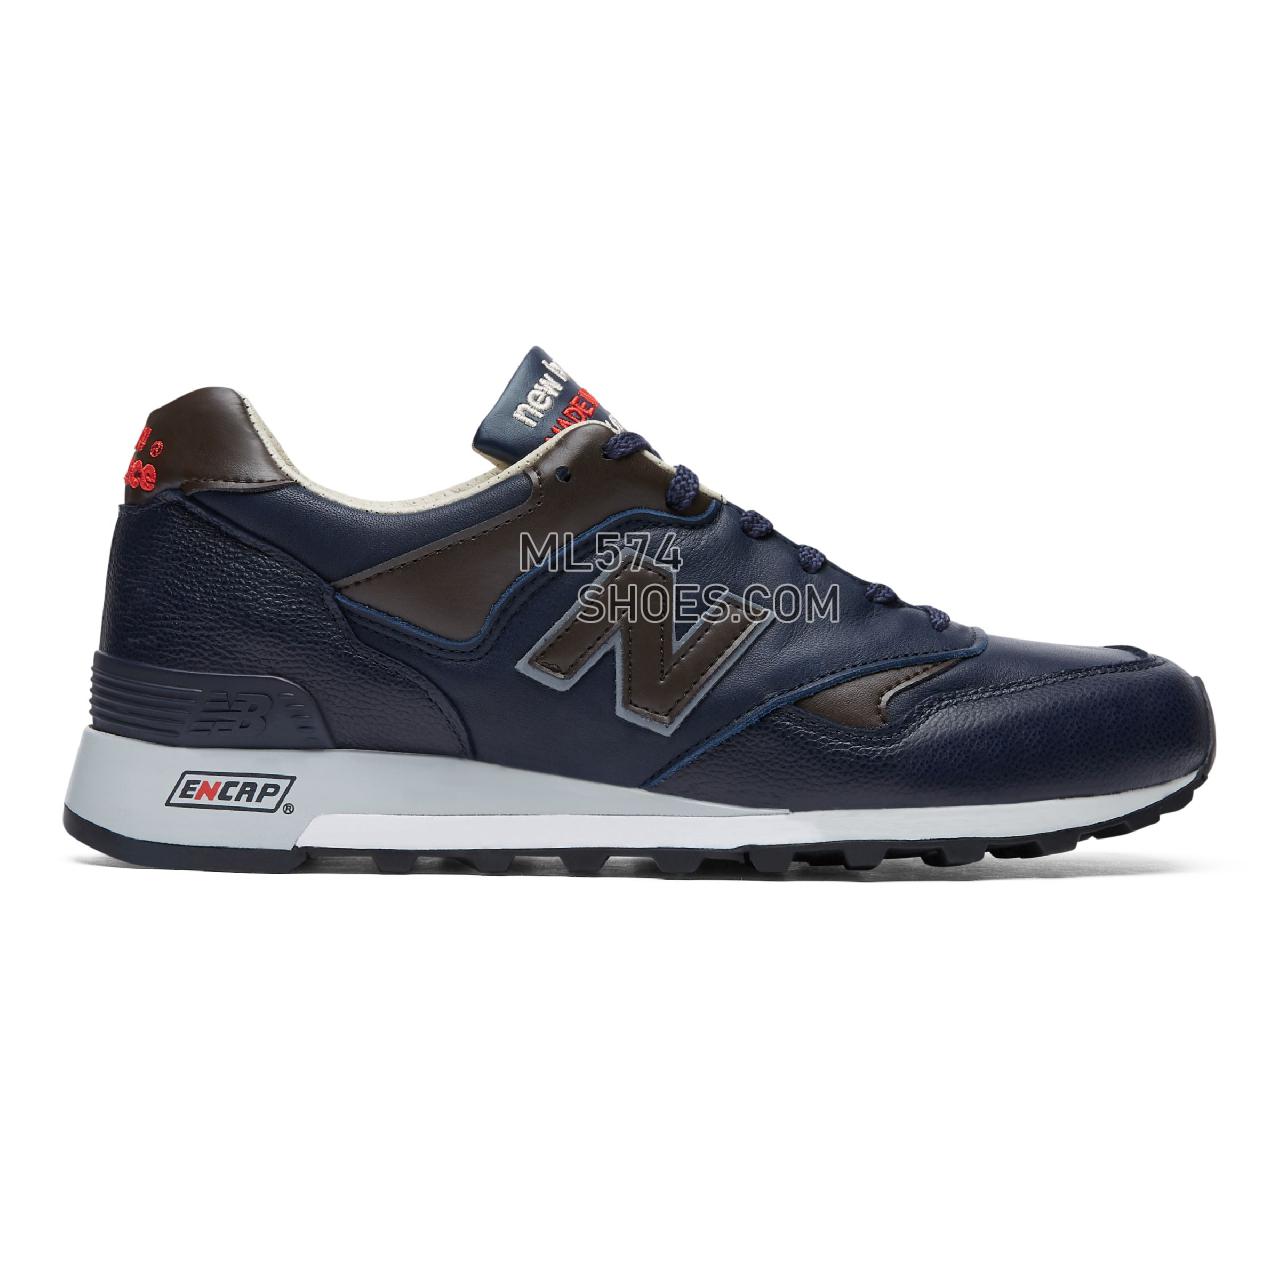 New Balance Made in UK 577 - Men's Made in UK 577 Classic ML577V1-27391-M - Navy with Brown and Red - M577GNB